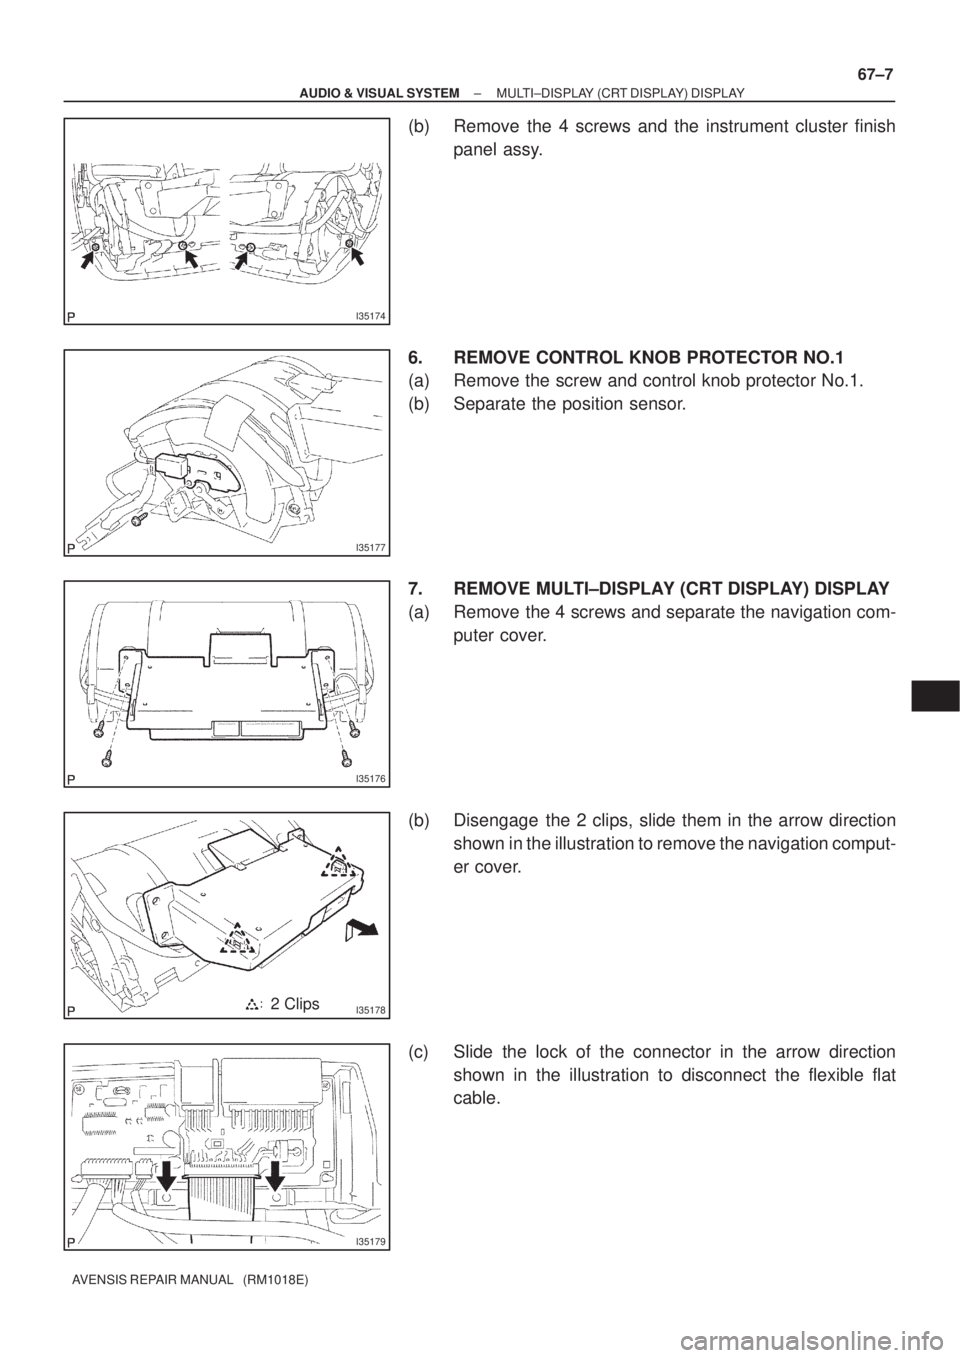 TOYOTA AVENSIS 2002  Repair Manual I35174
I35177
I35176
I351782 Clips
I35179
± AUDIO & VISUAL SYSTEMMULTI±DISPLAY (CRT DISPLAY) DISPLAY
67±7
AVENSIS REPAIR MANUAL   (RM1018E)
(b) Remove the 4 screws and the instrument cluster finish